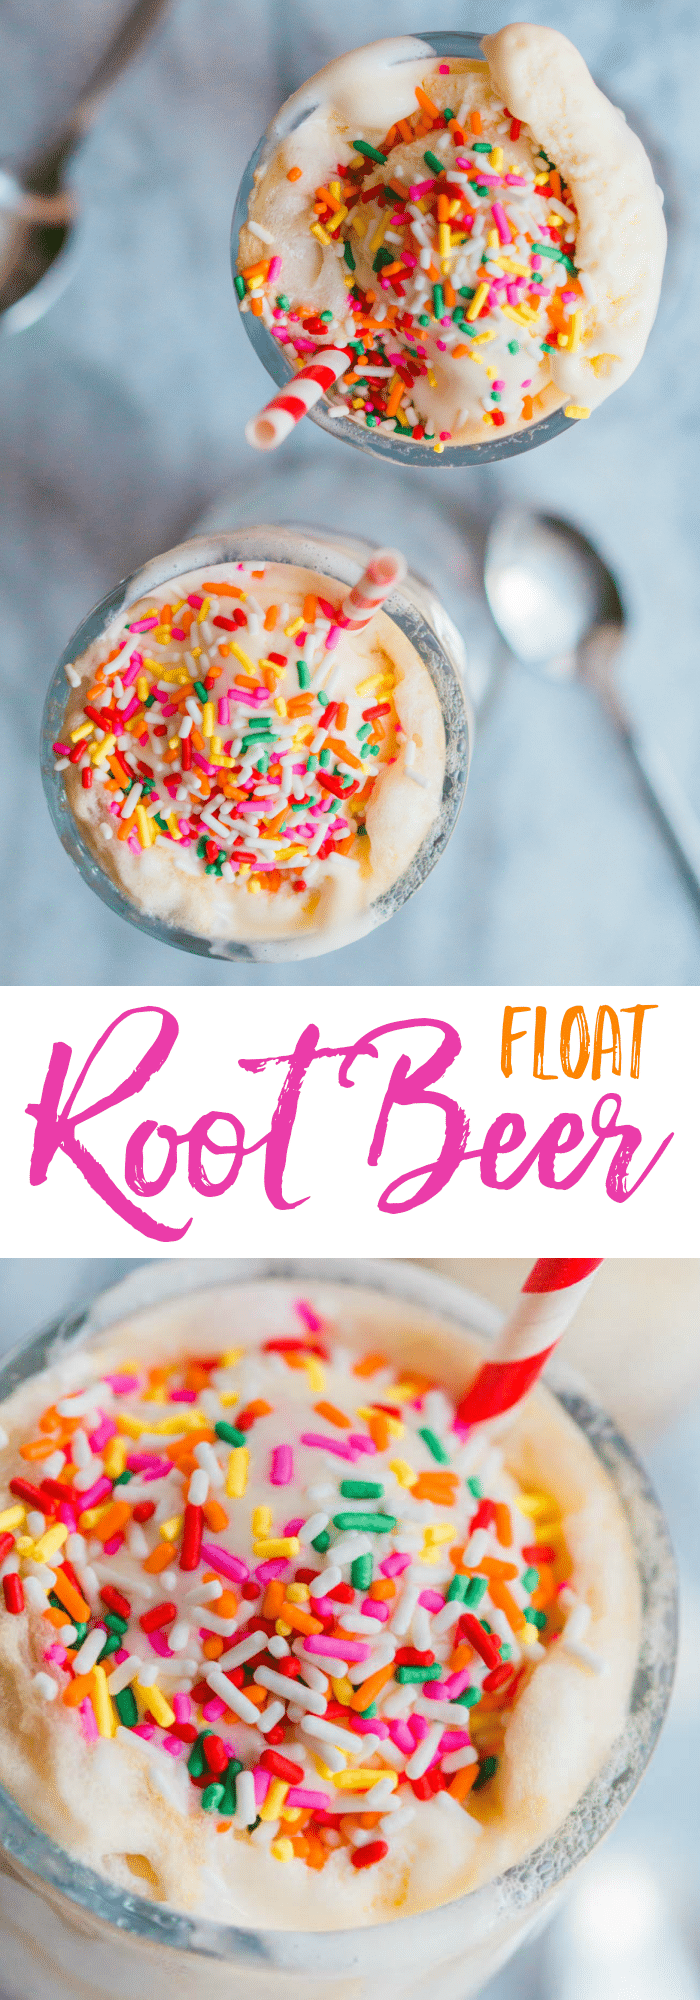 In honor of national root beer float day, I am excited to share with you a light root beer float recipe that is super easy to make